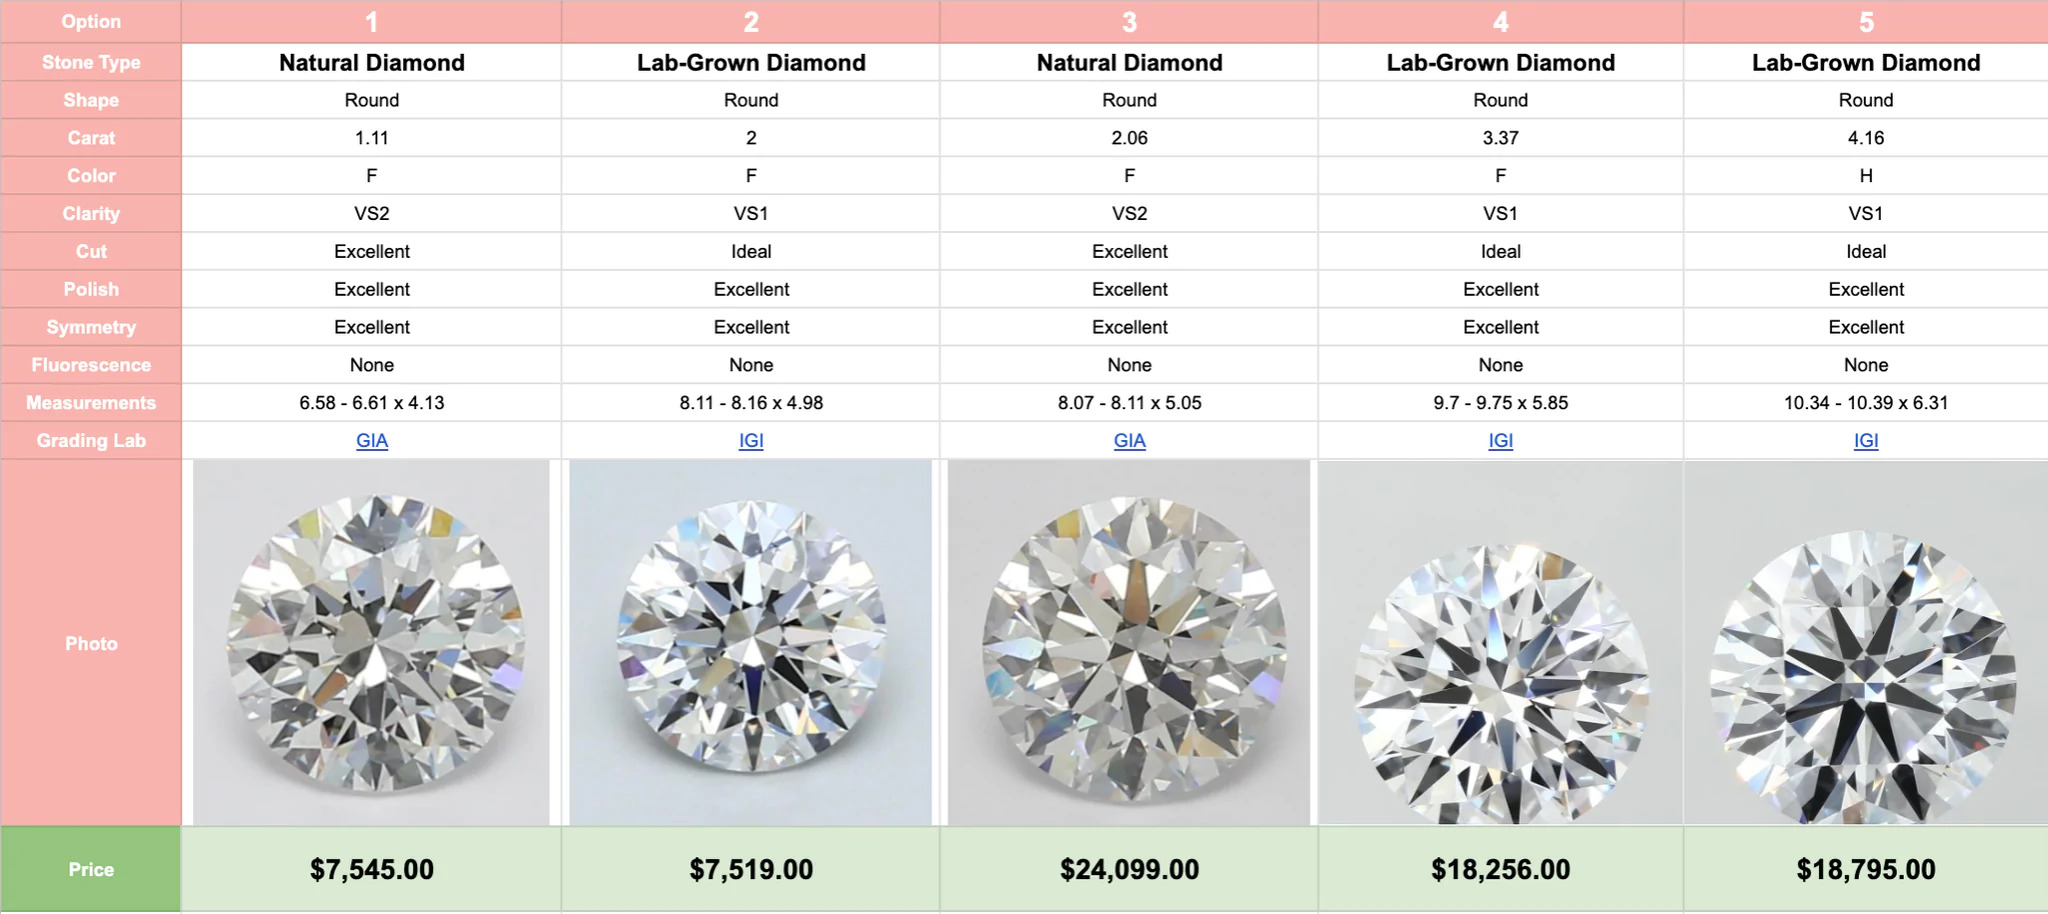 What is the difference between lab-grown diamond and natural diamond?